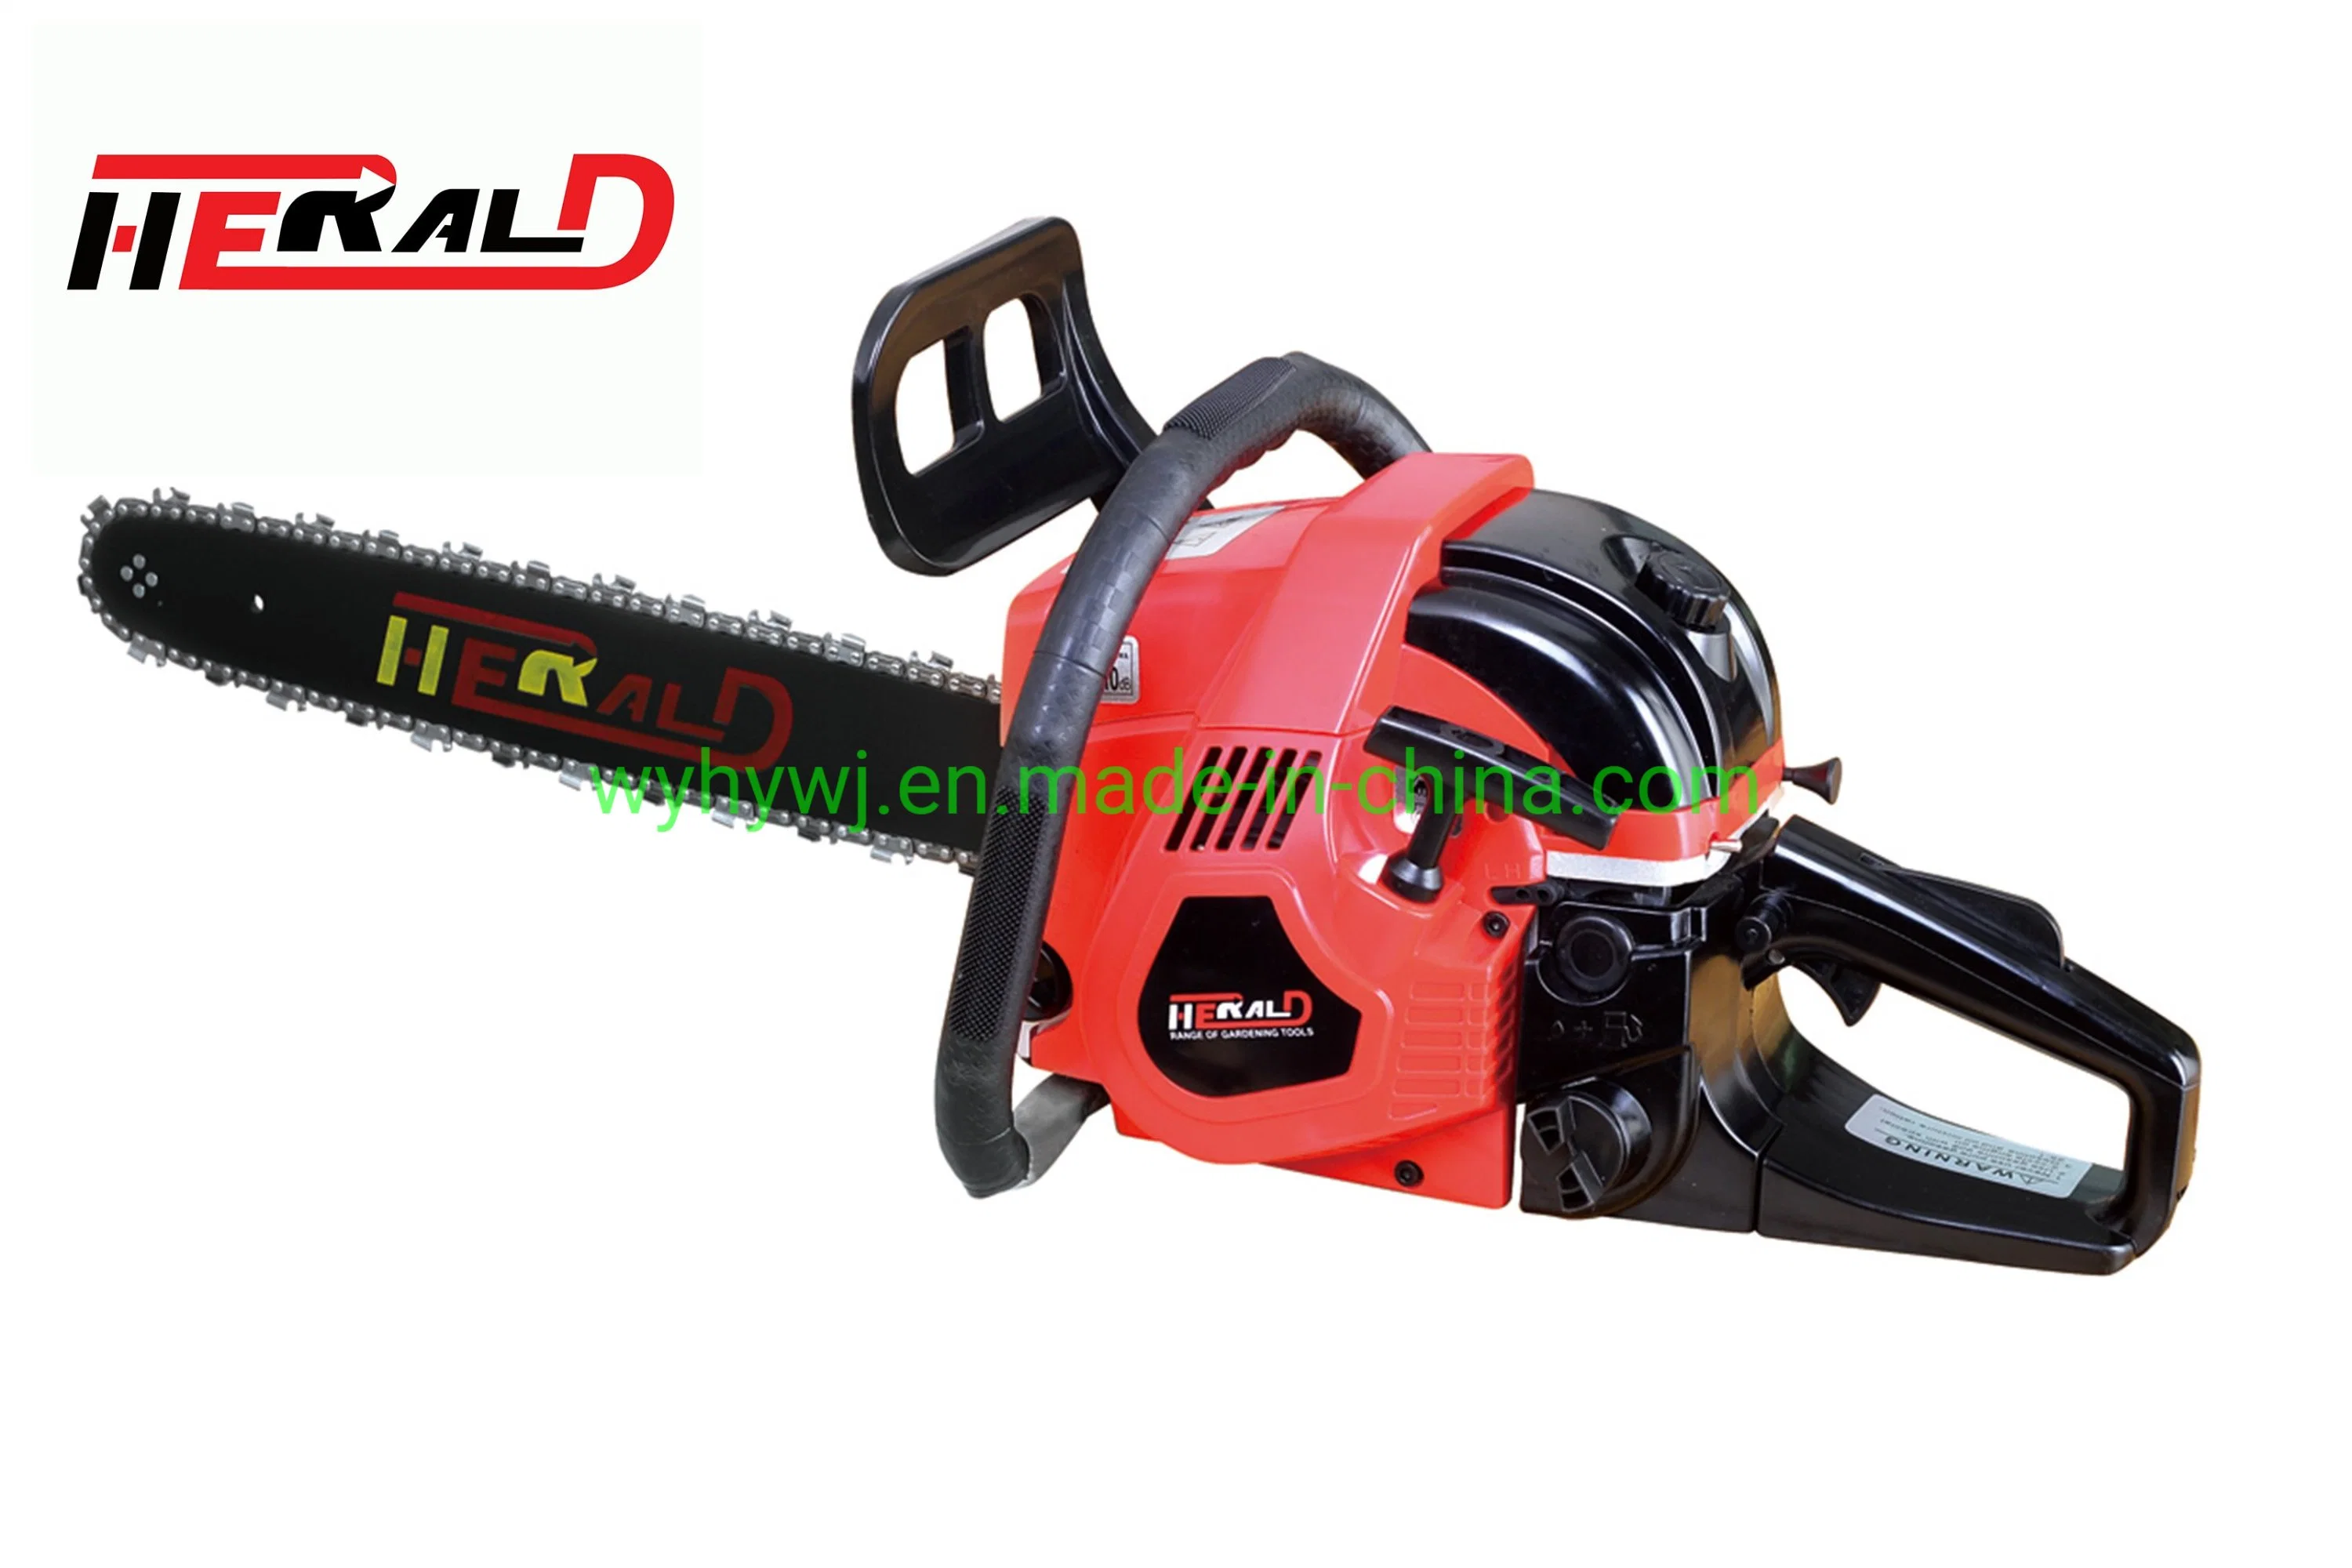 Famous High Quality Gasoline/Petrol Chain Saw Hy-52D 58cc Strong Power Cutting Wood Saw